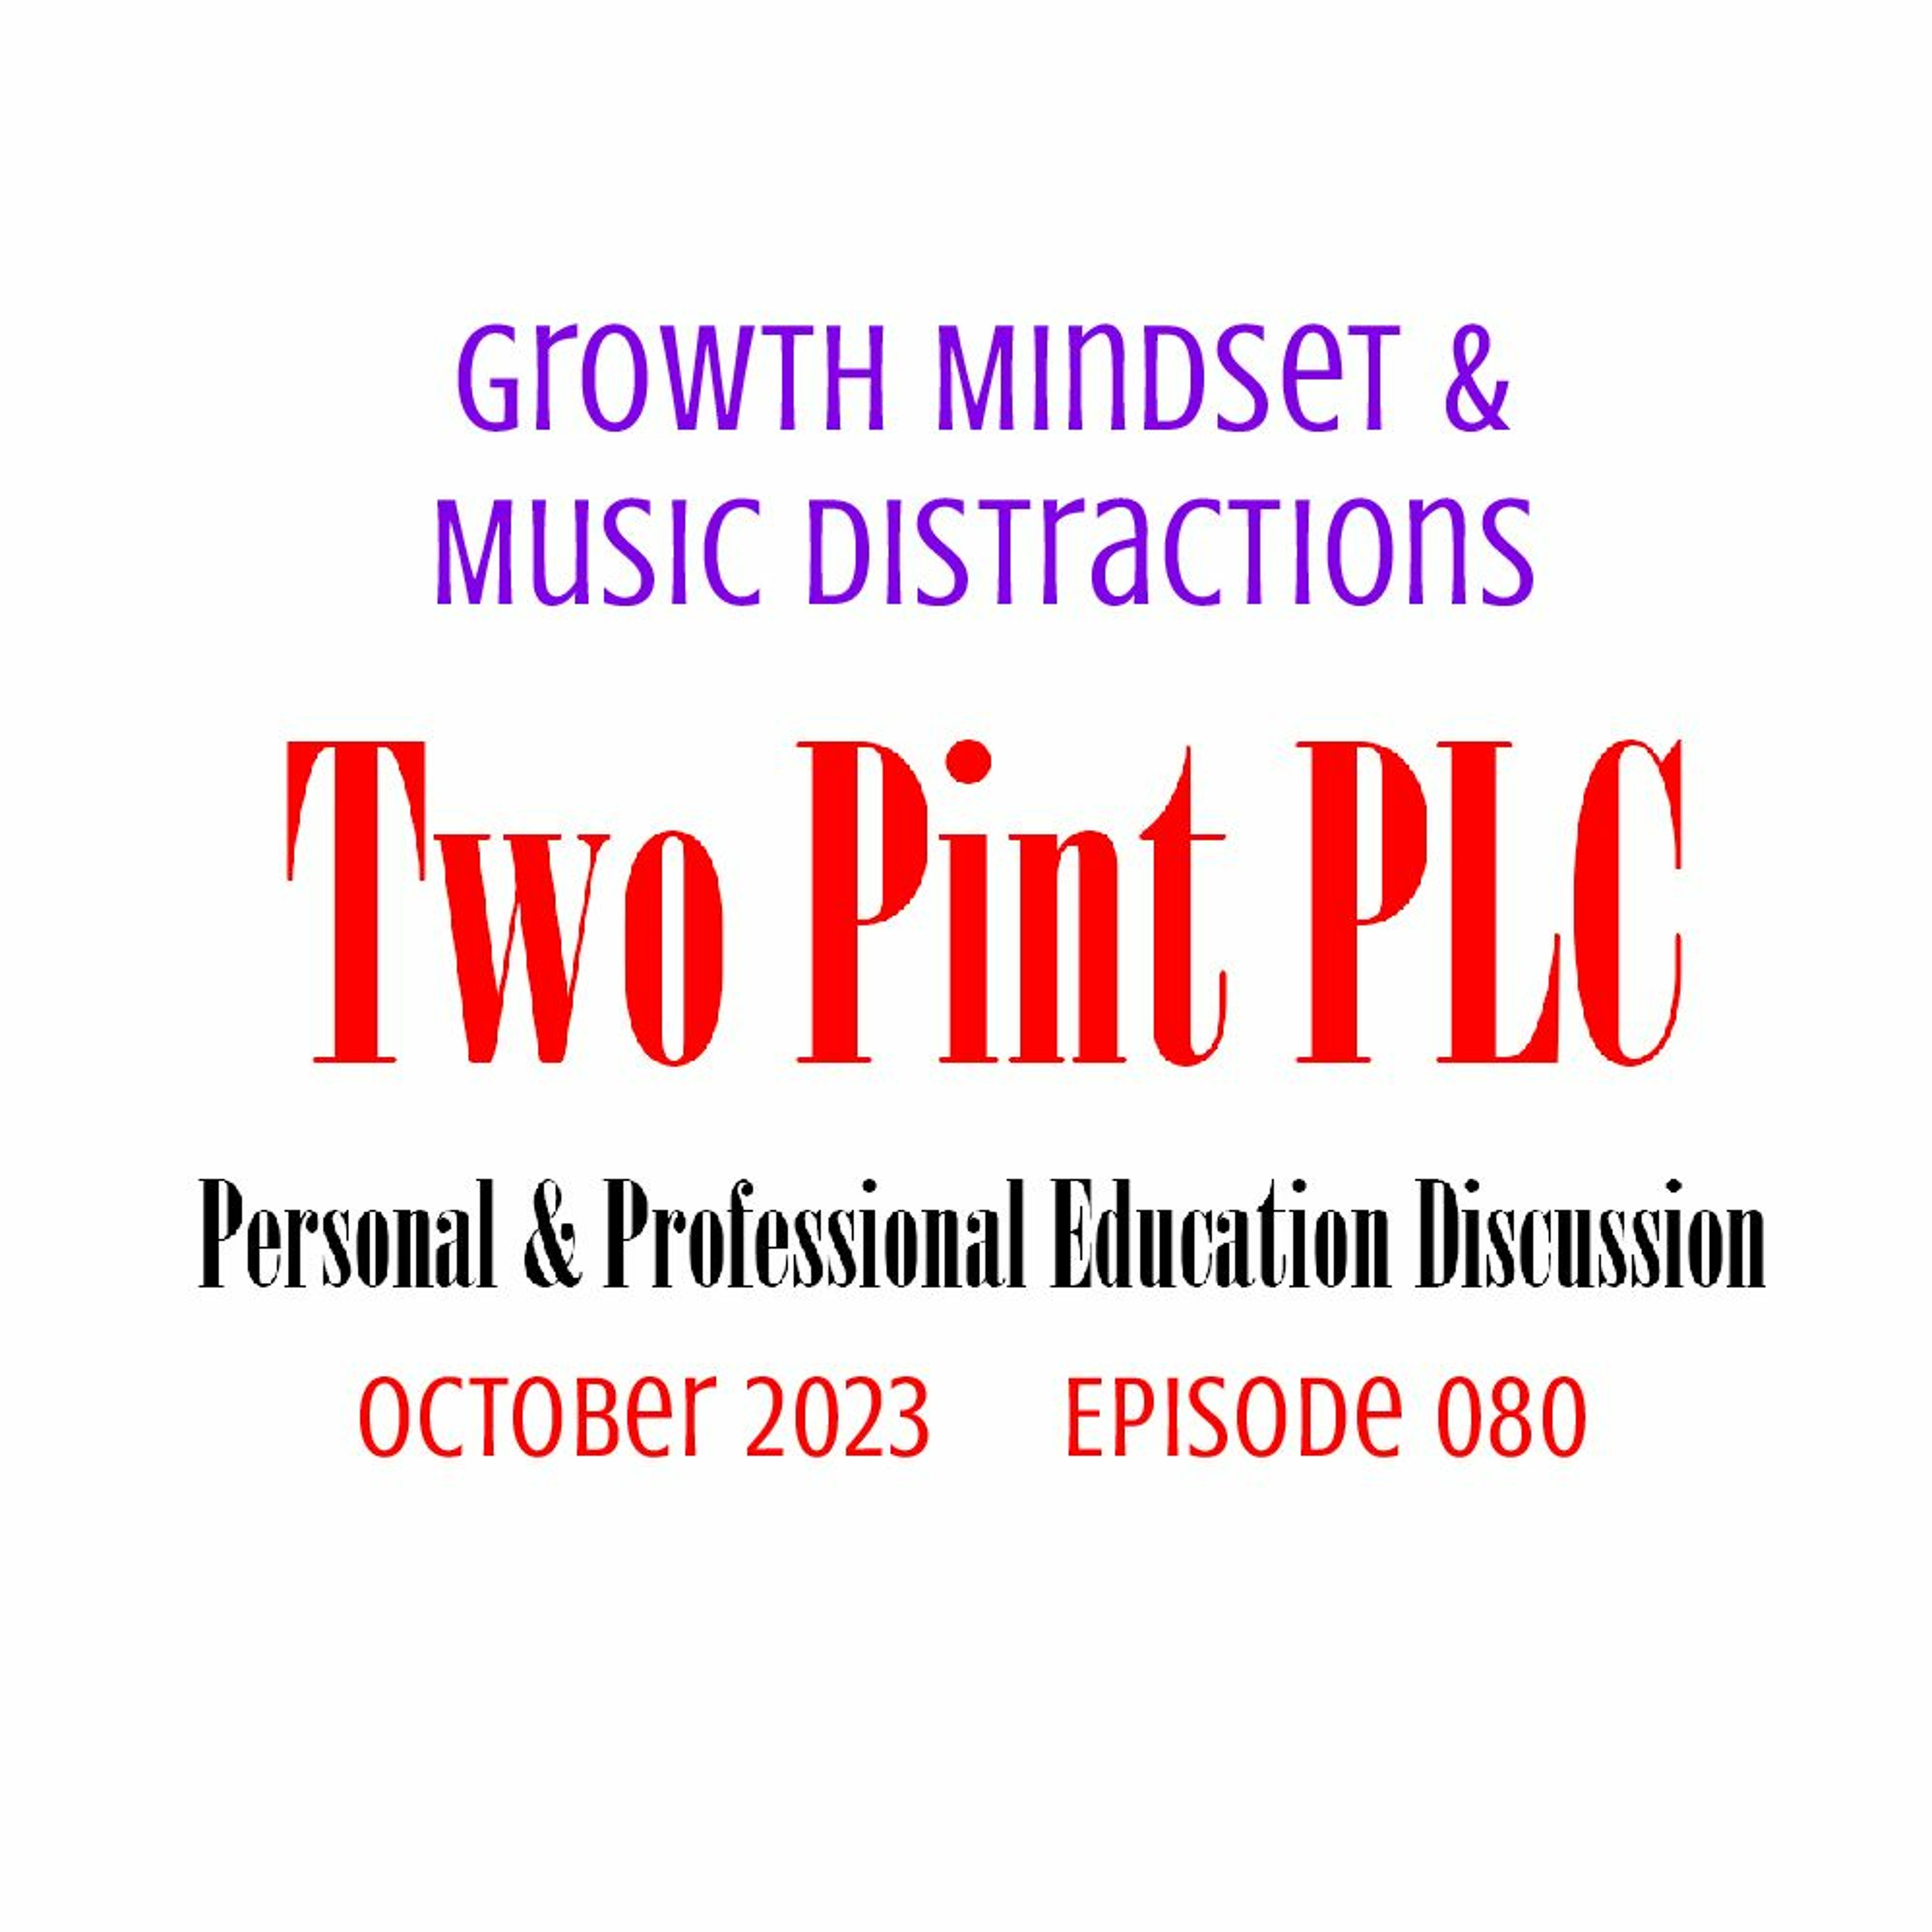 080 Growth Mindset & Music Distractions